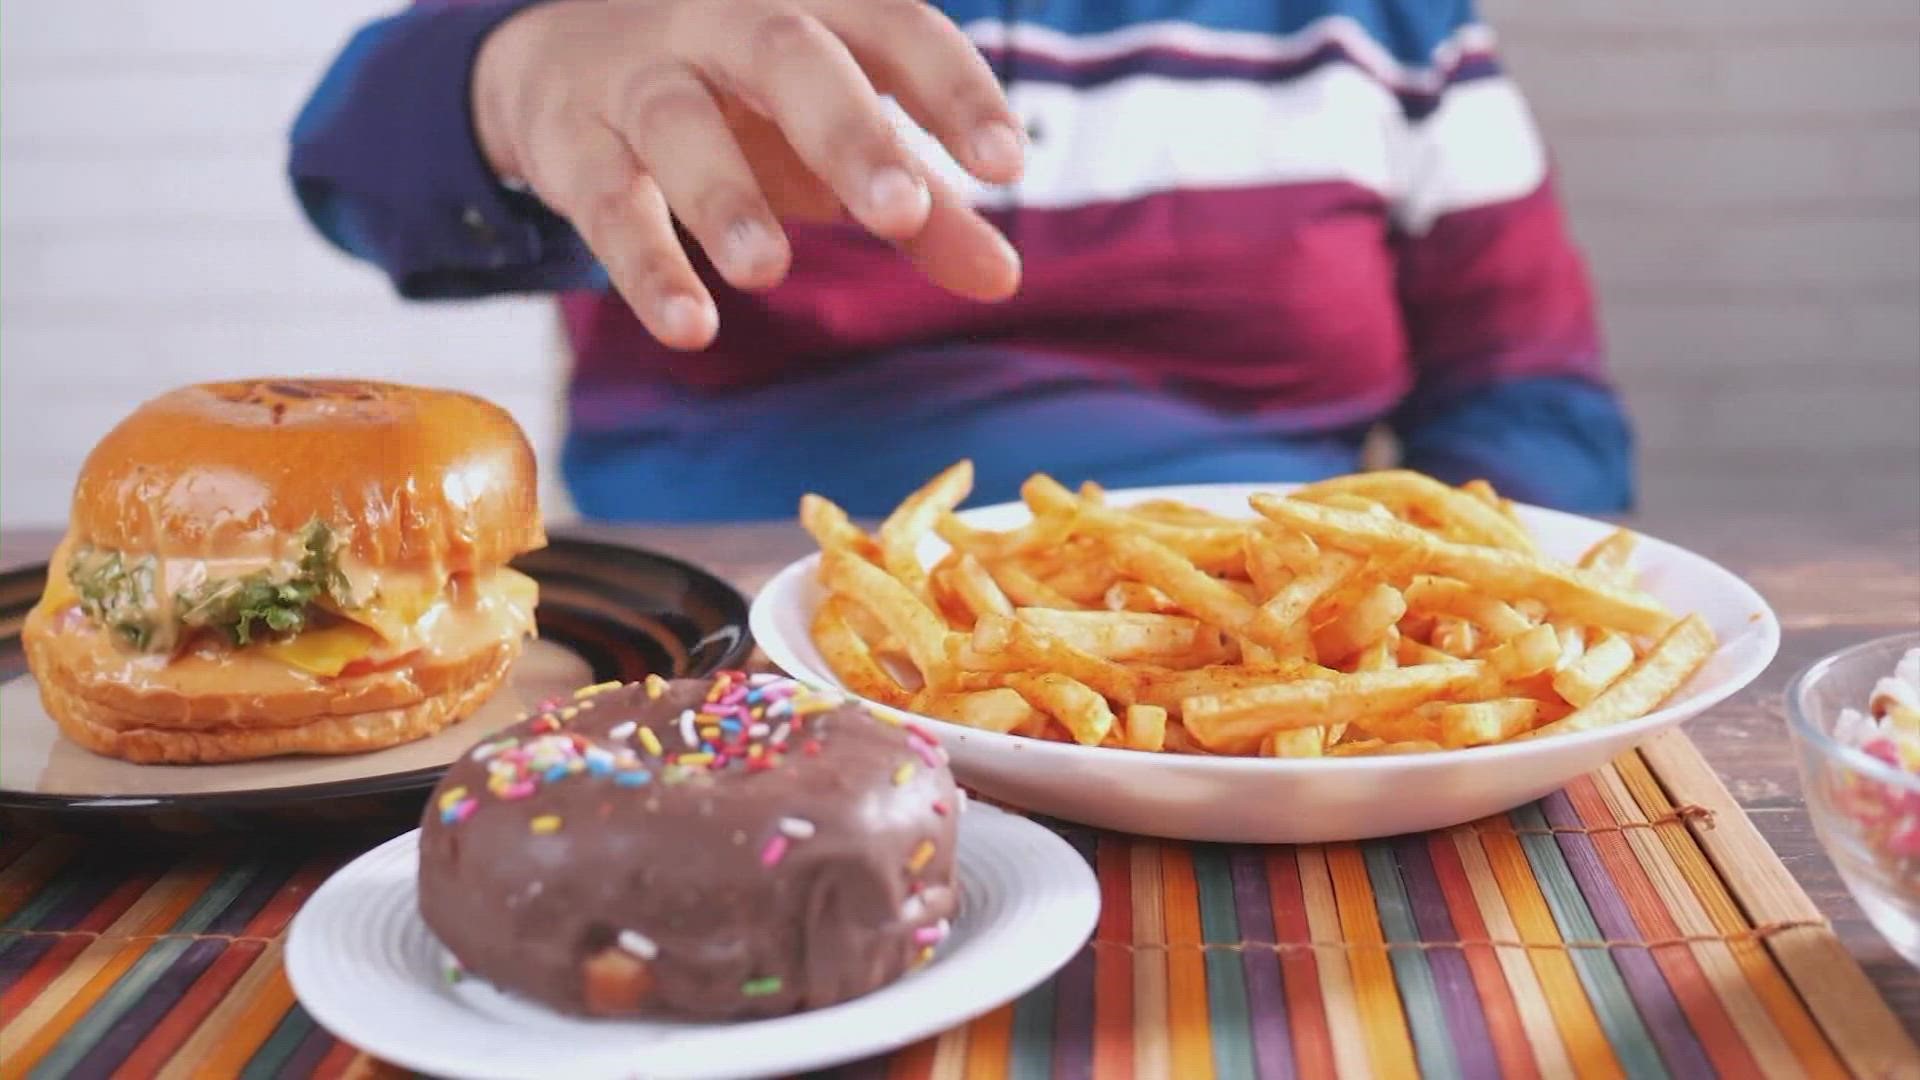 It's no secret that loading up on cheeseburgers, chips and cookies can cause a number of health issues. A study shows junk food might also be linked to dementia.